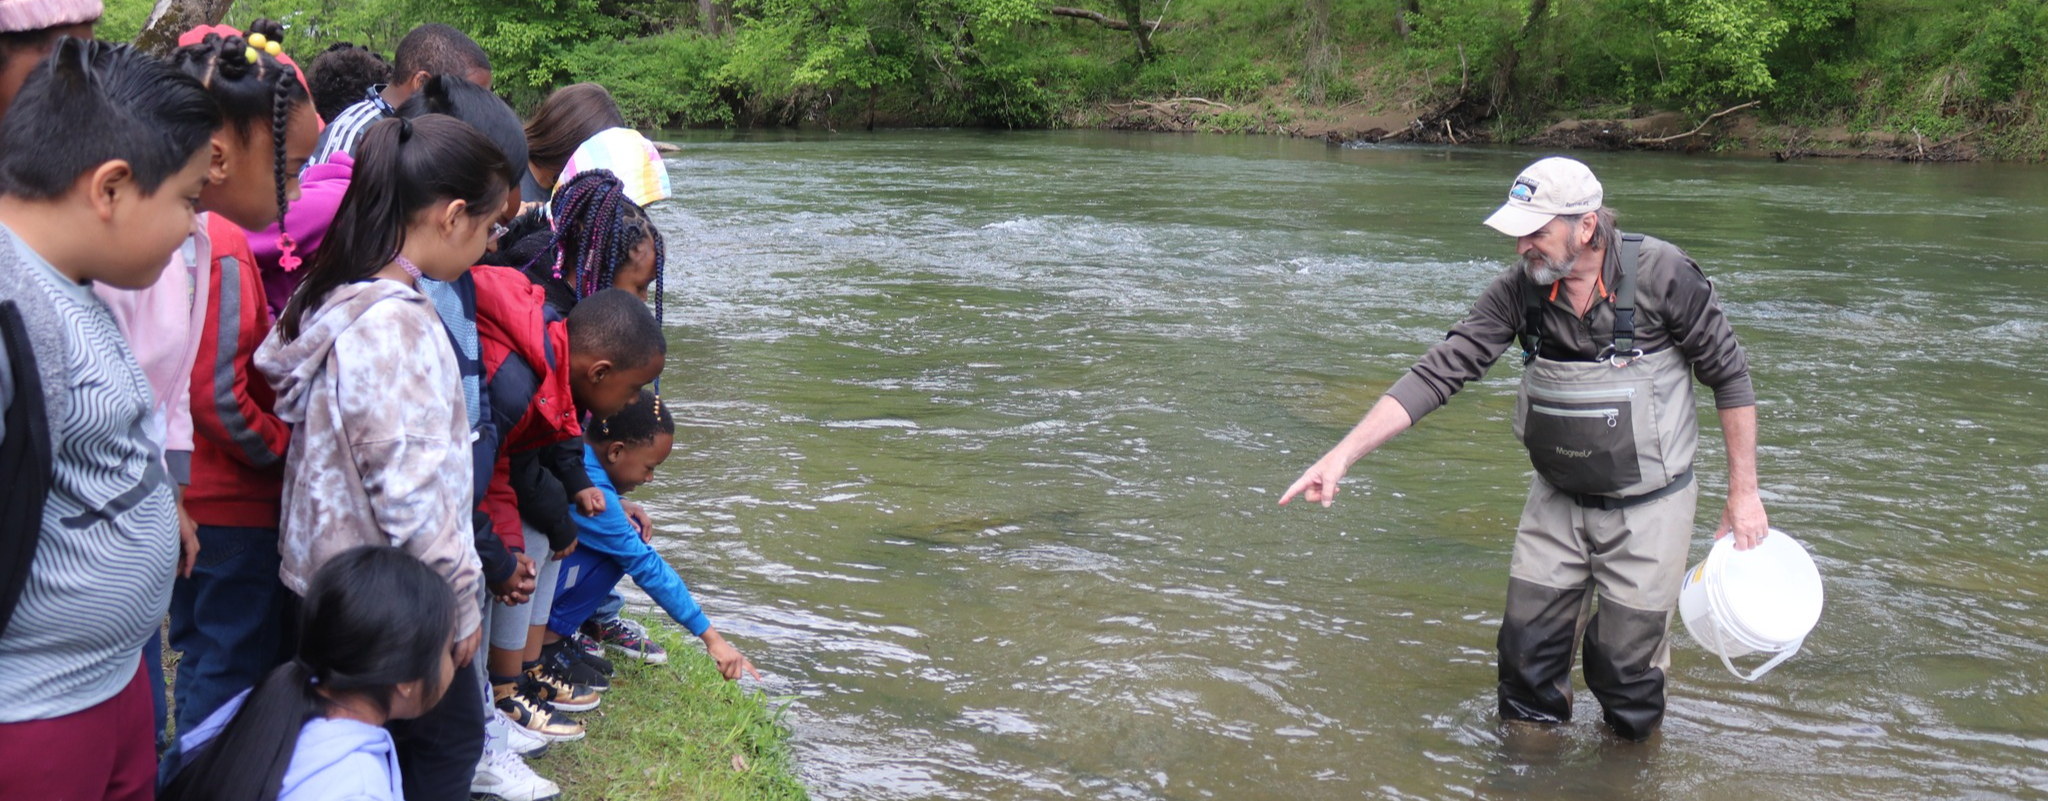 Students stand on a riverbank as a DRBA employee stands in the river and points to the water